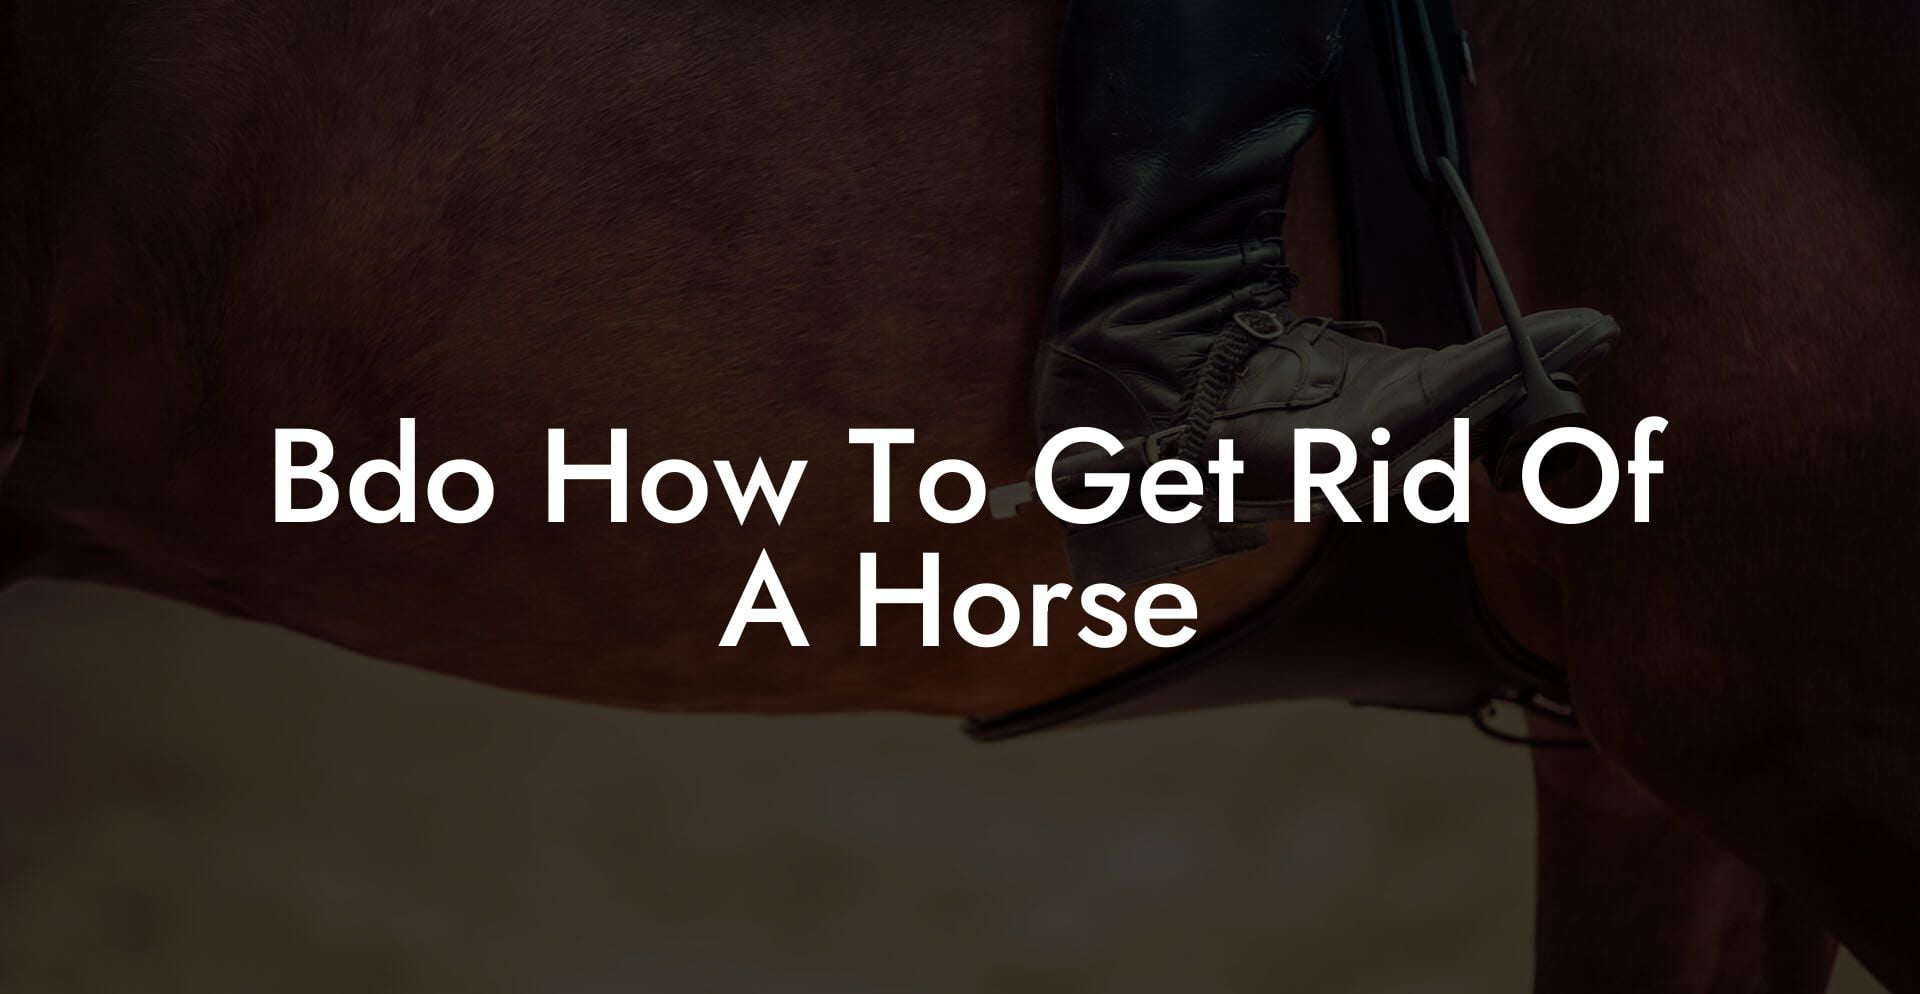 Bdo How To Get Rid Of A Horse